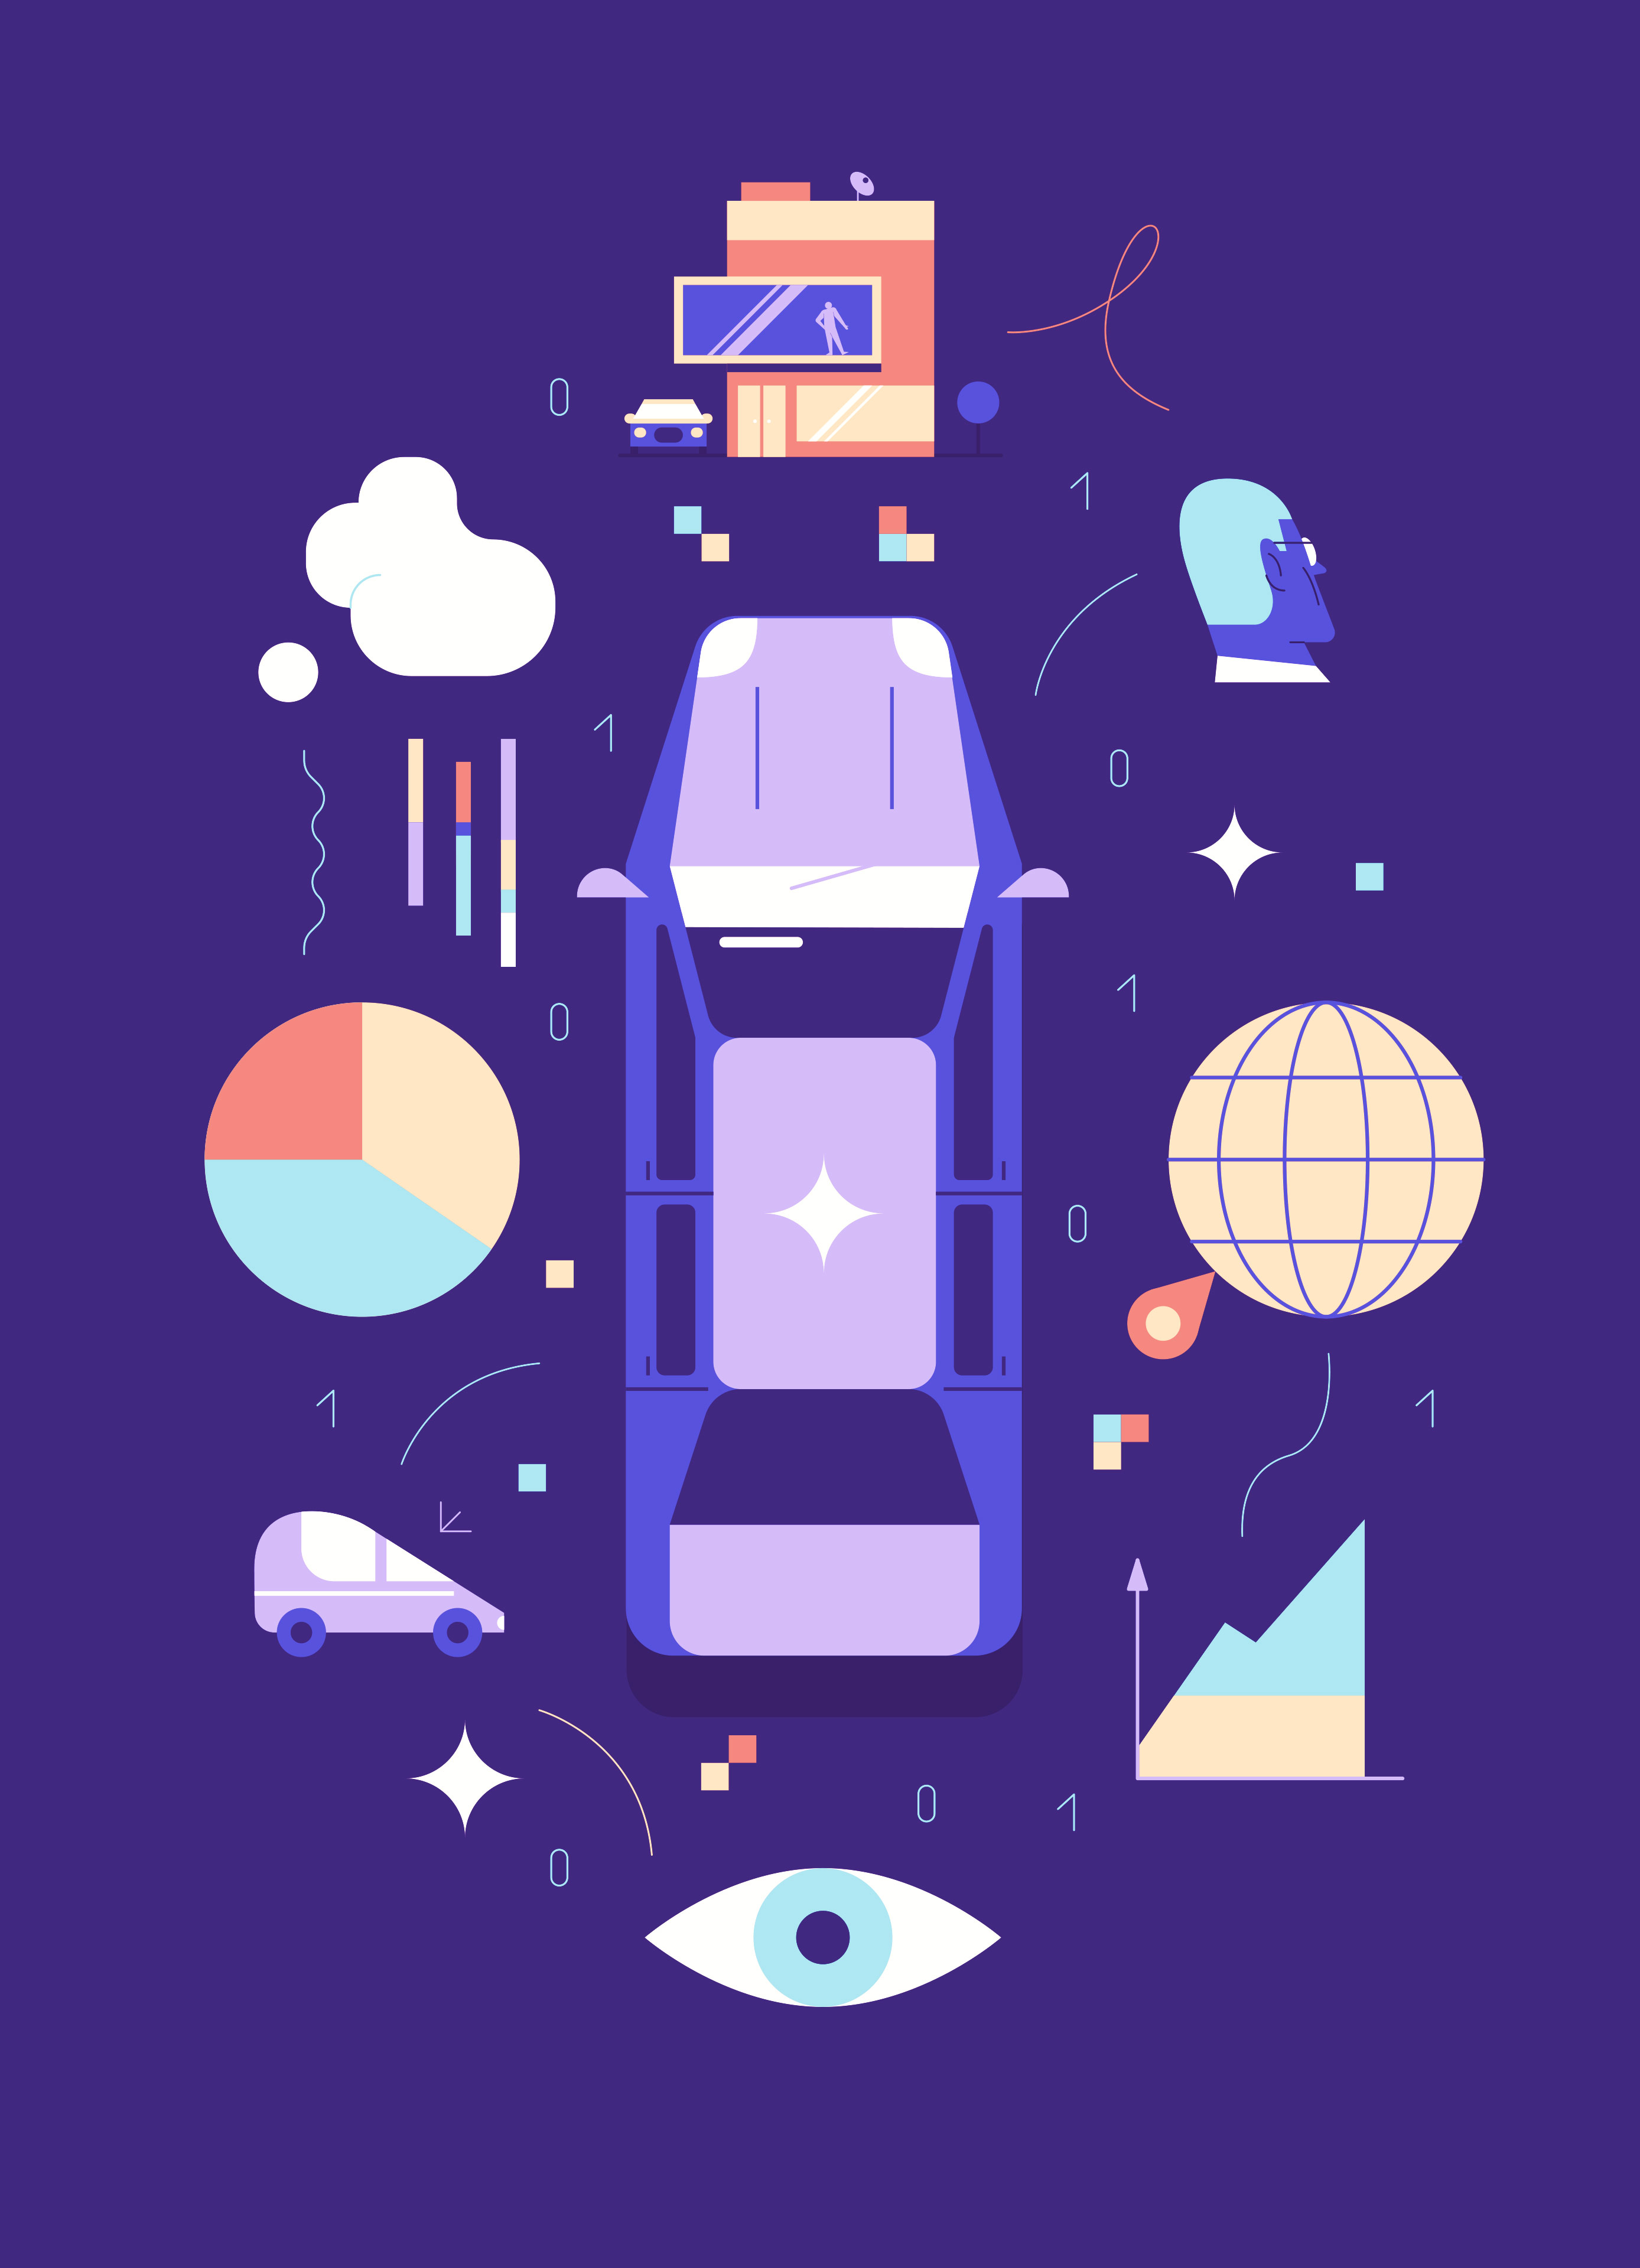 Connected car illustration.